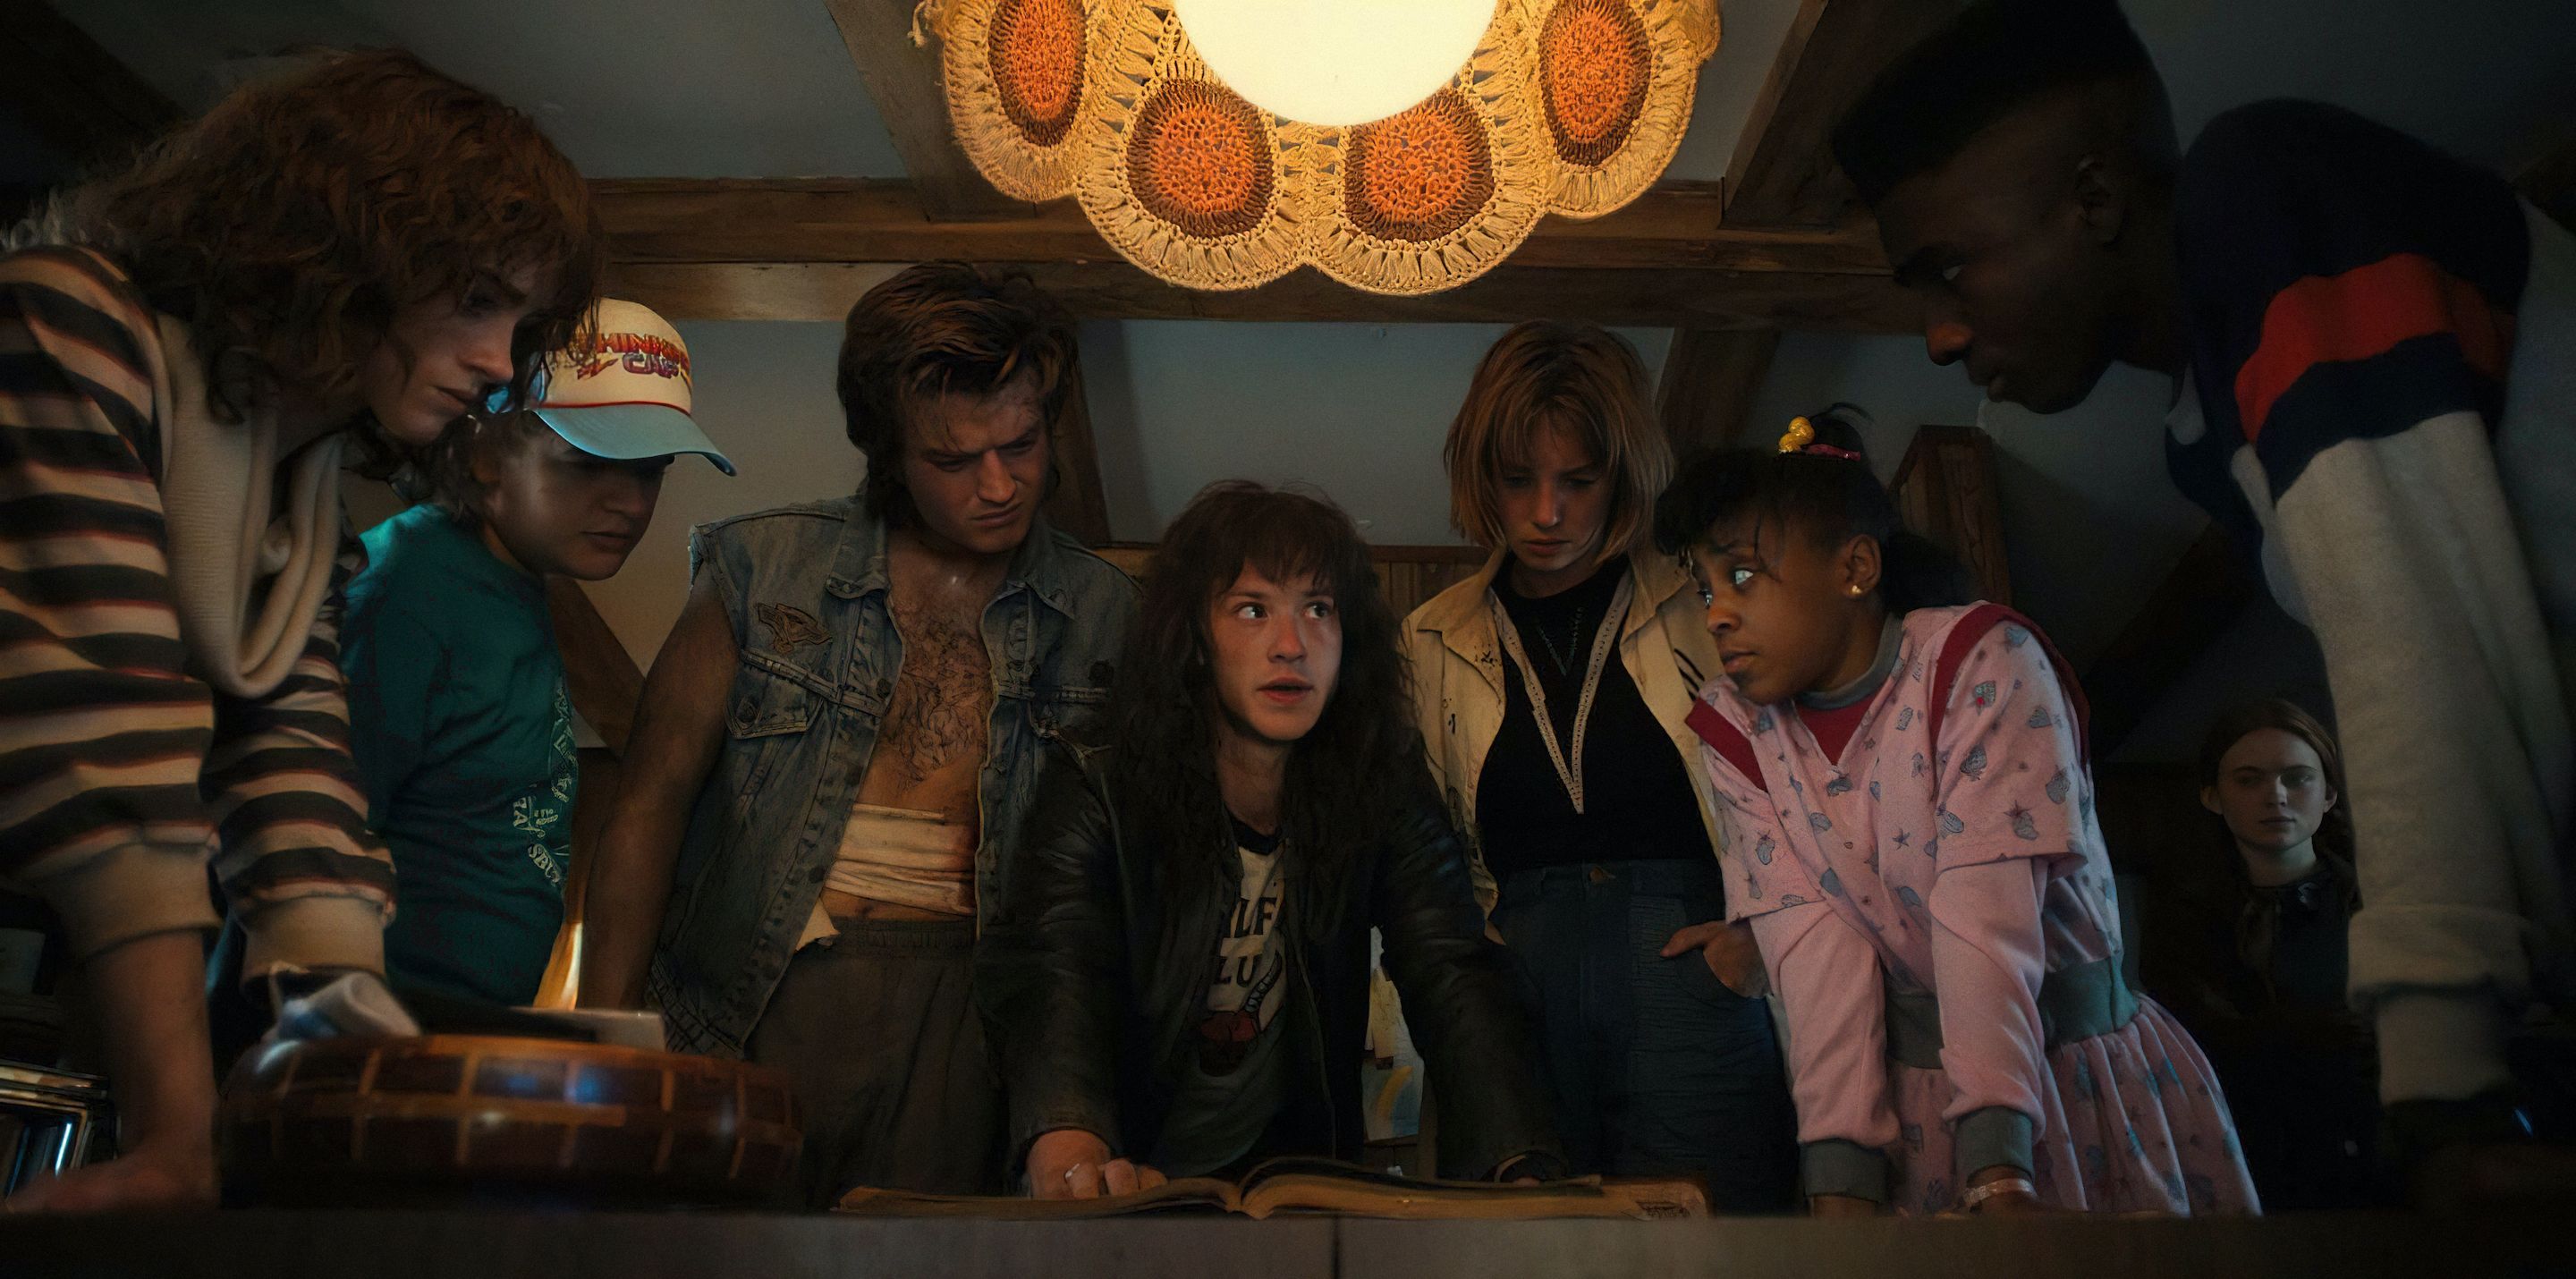 Stranger Things 4 Volume 2 - Netflix Release Date, News, and More